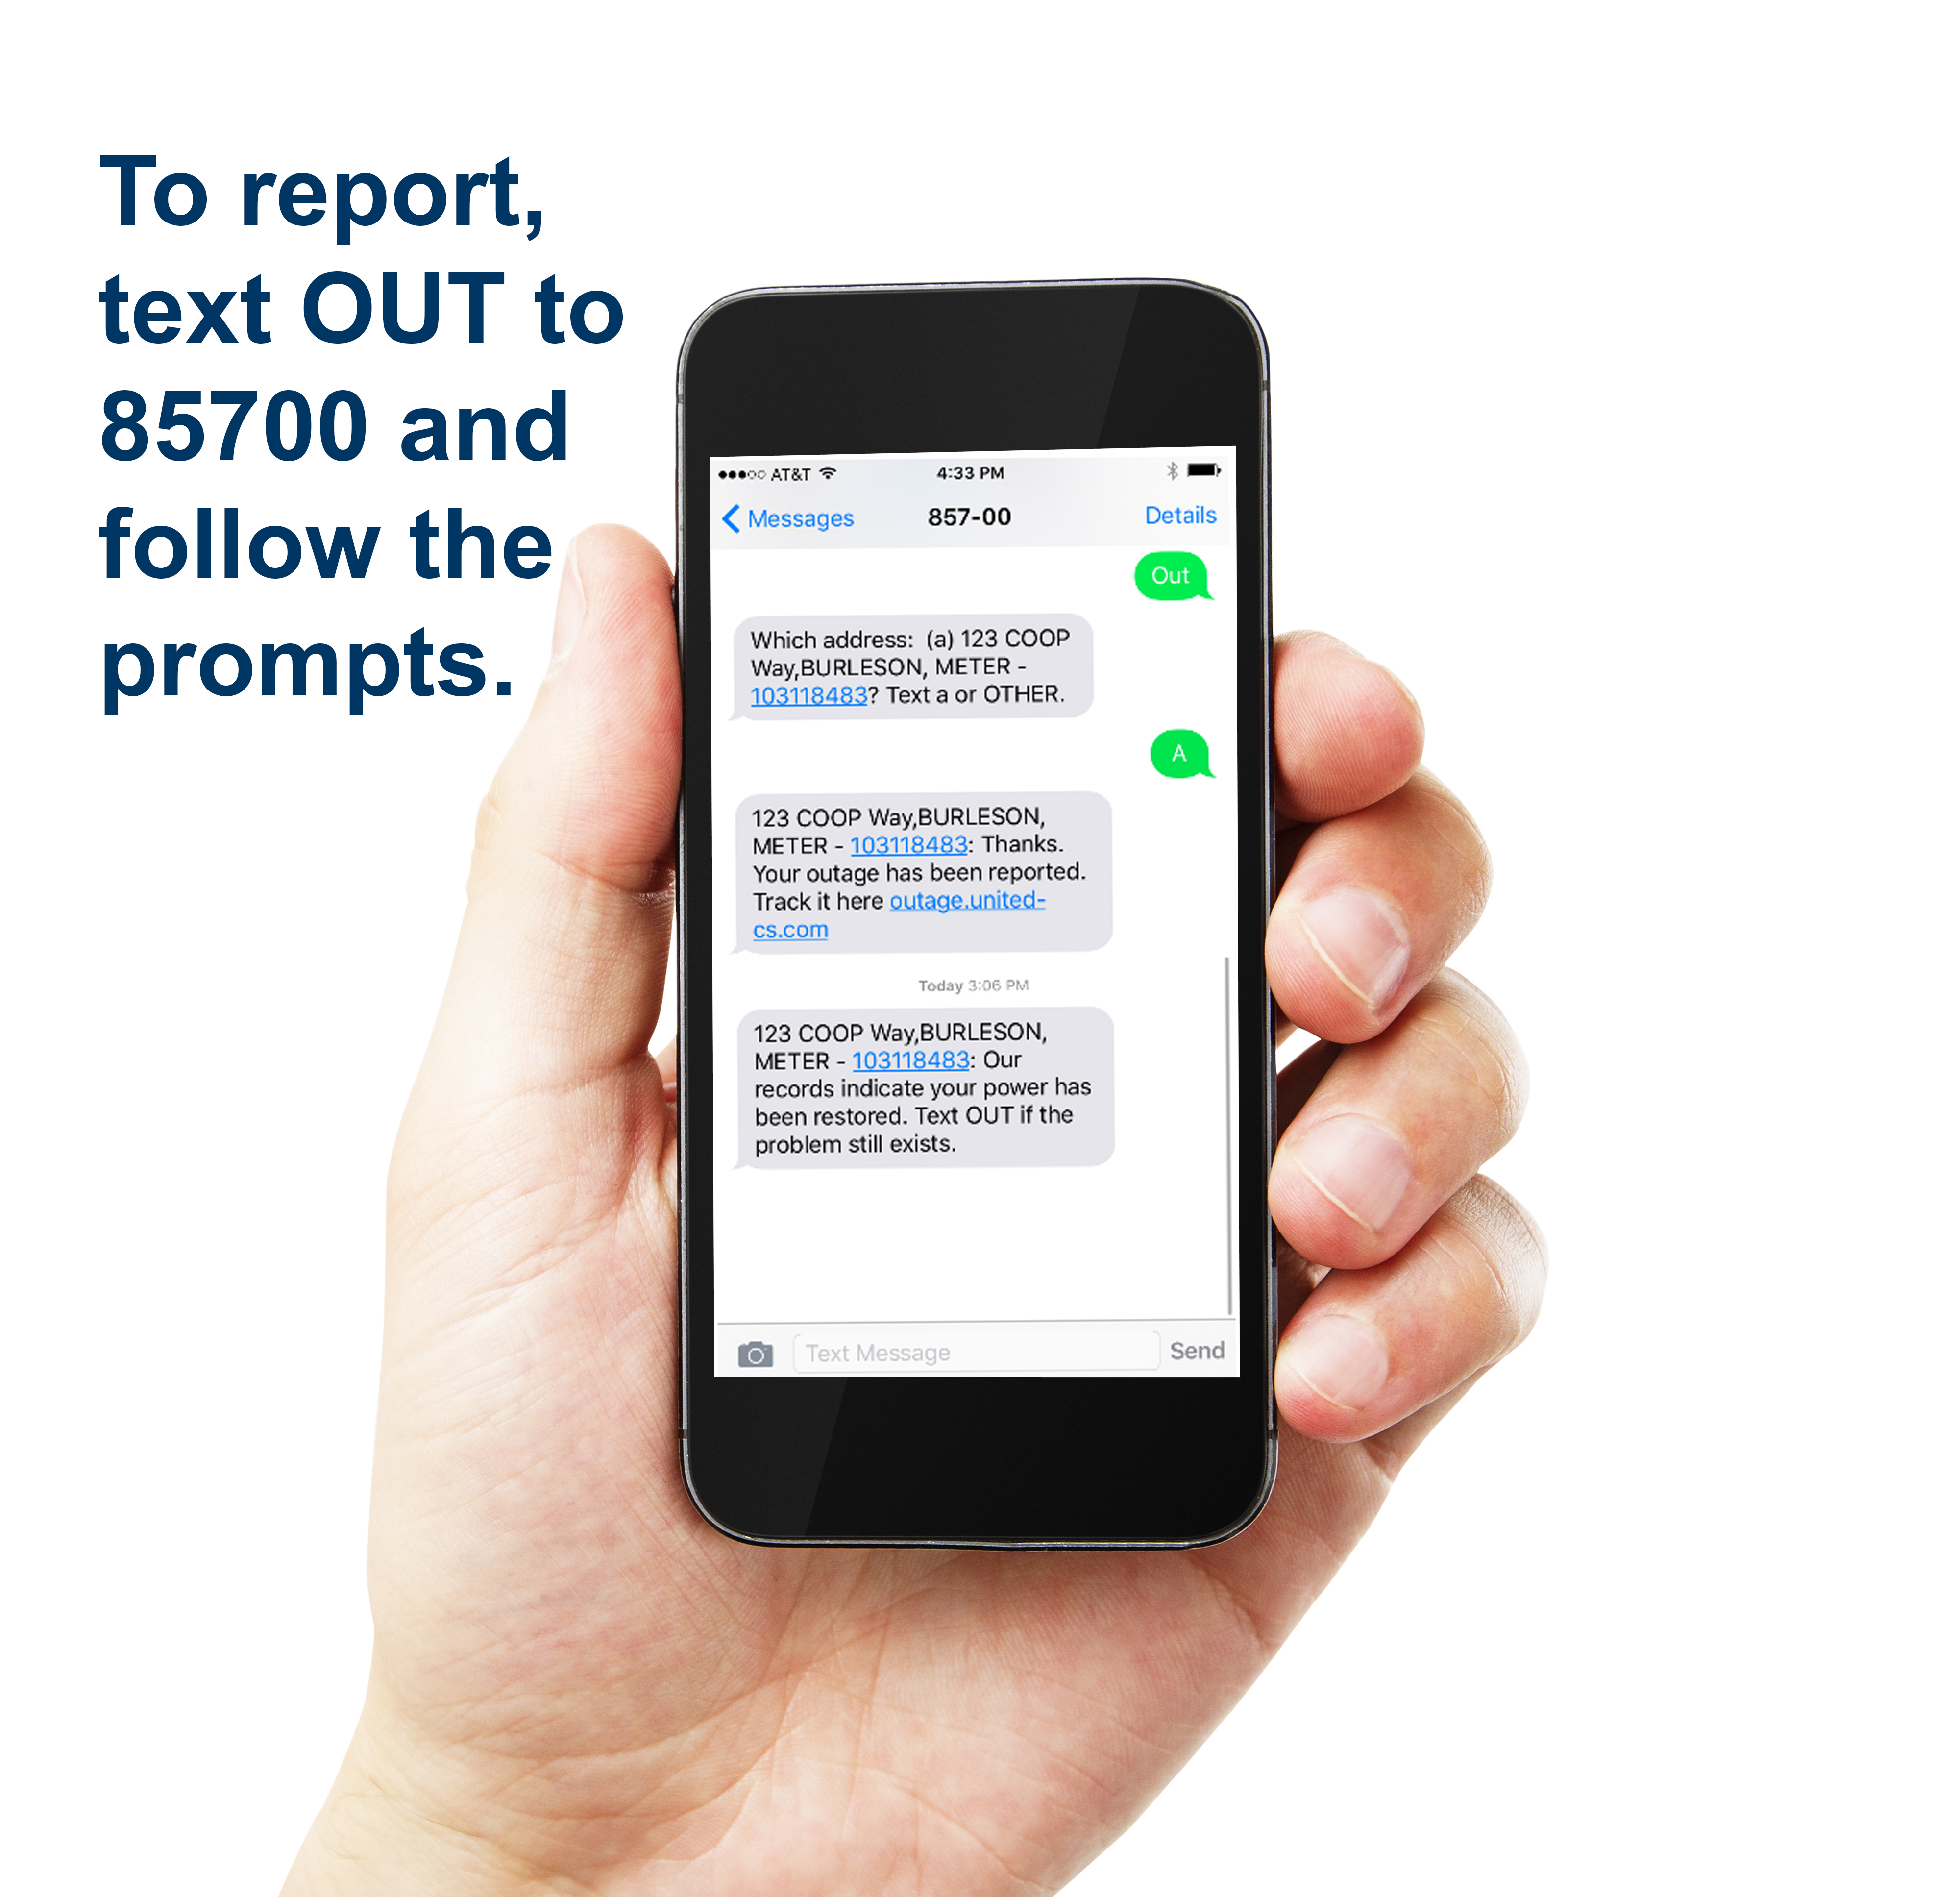 Cell phone to report an outage, text OUT to 85700